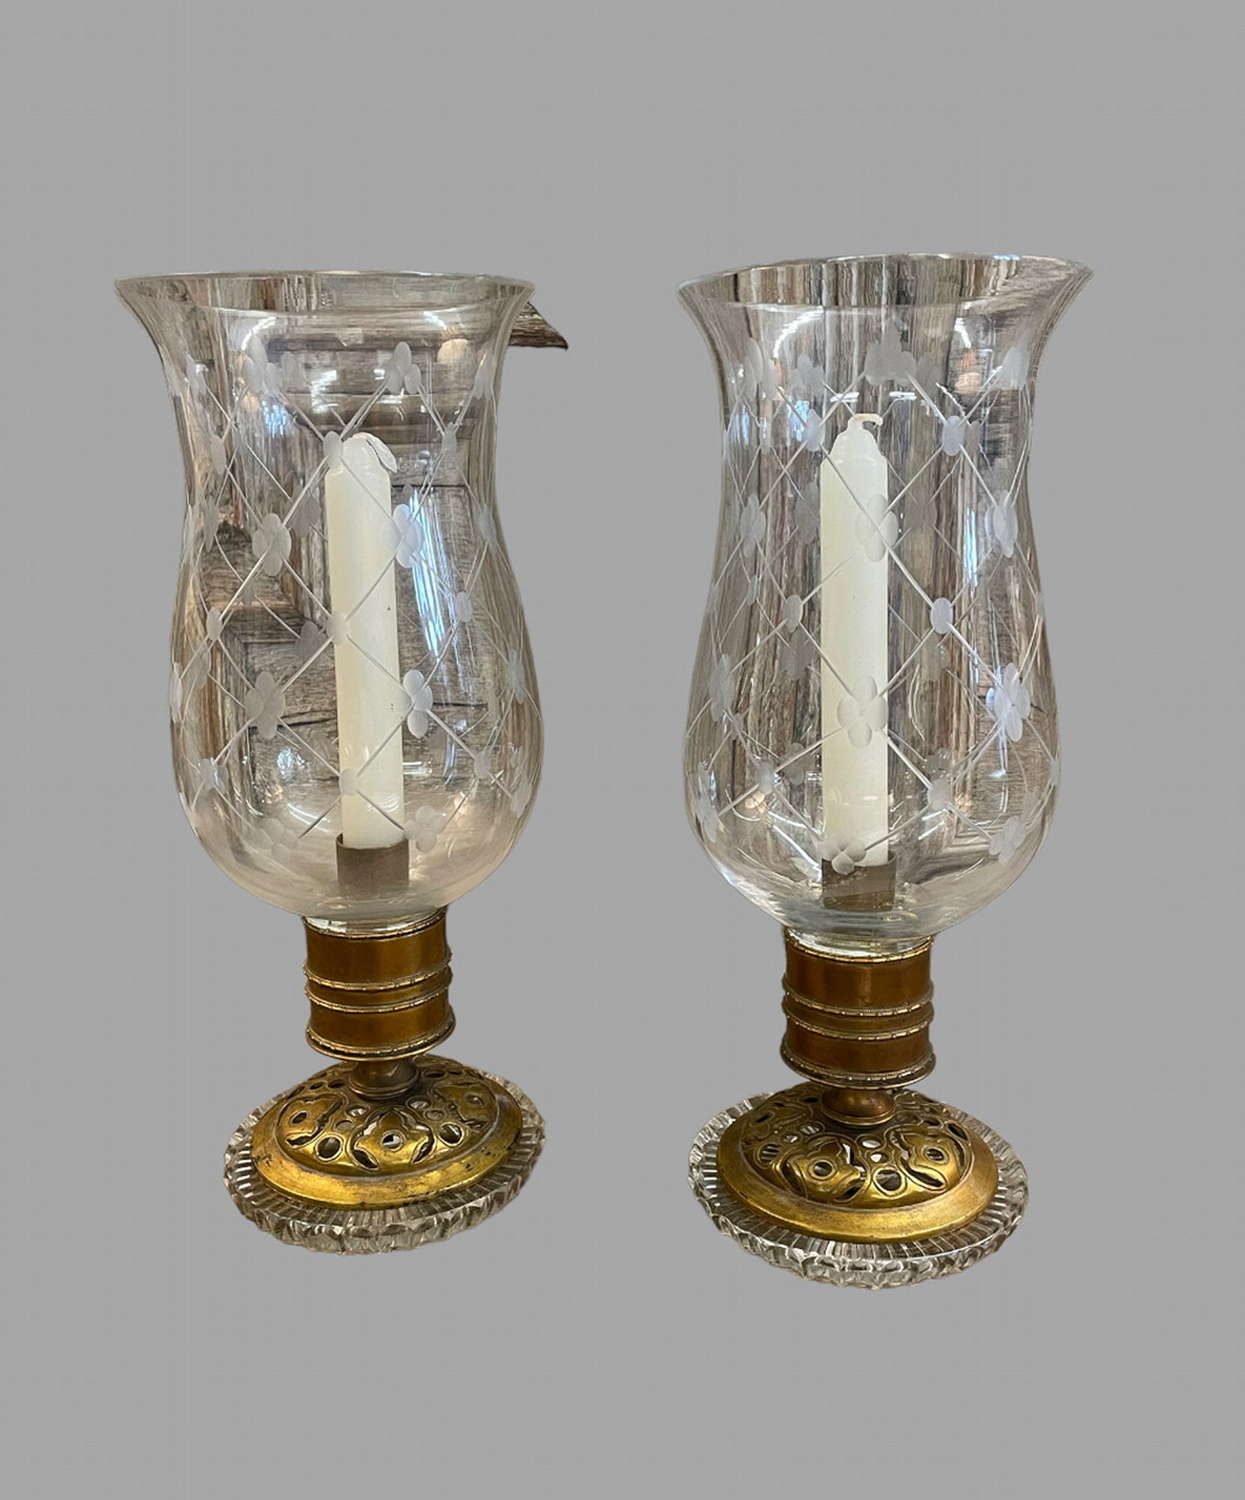 An Attractive Pair Of Storm Lanterns